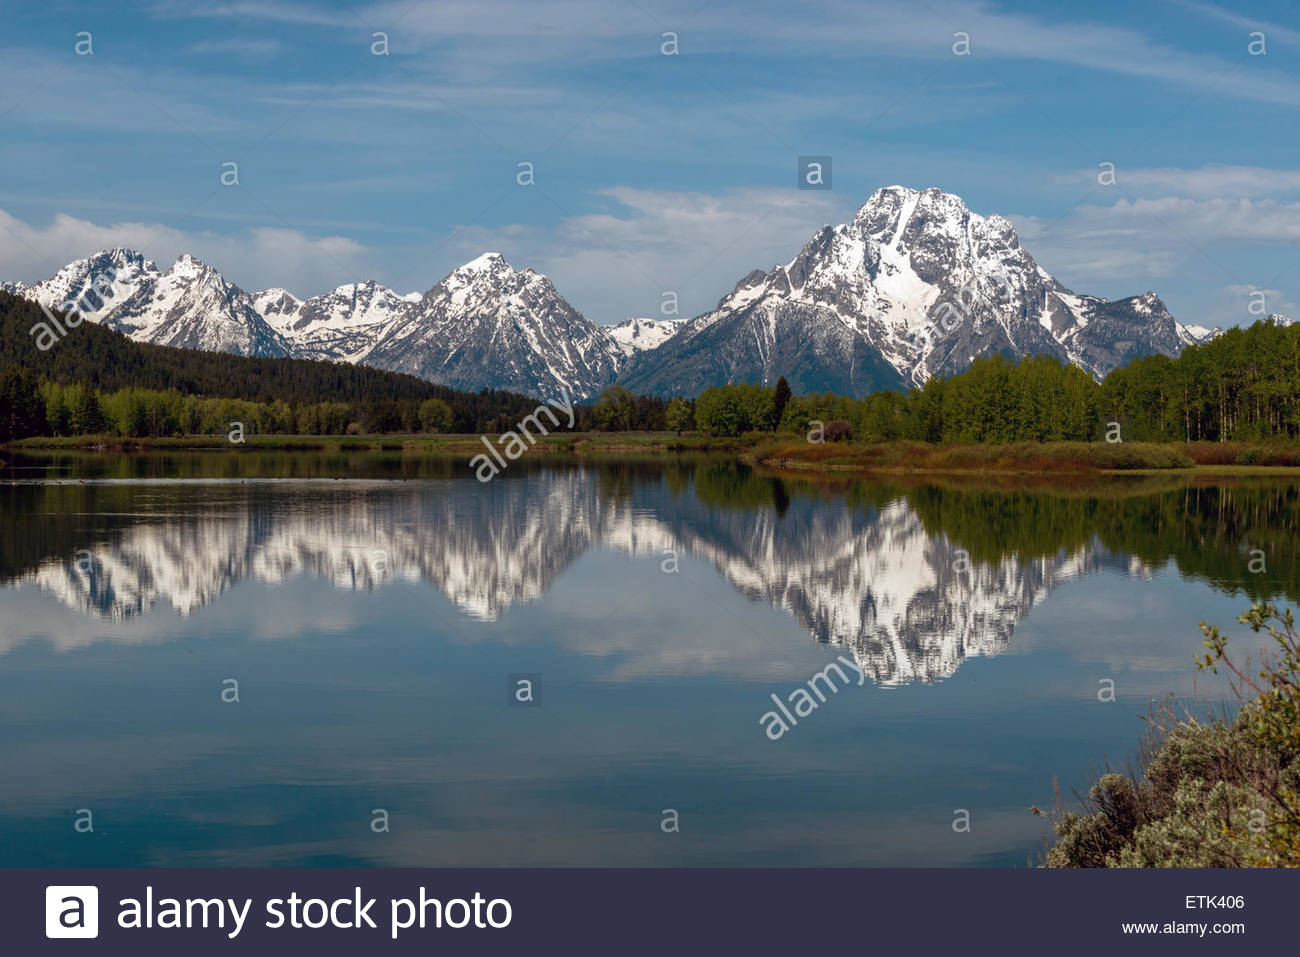 Yellowstone Lake Reflecting Mountains From The Background Stock